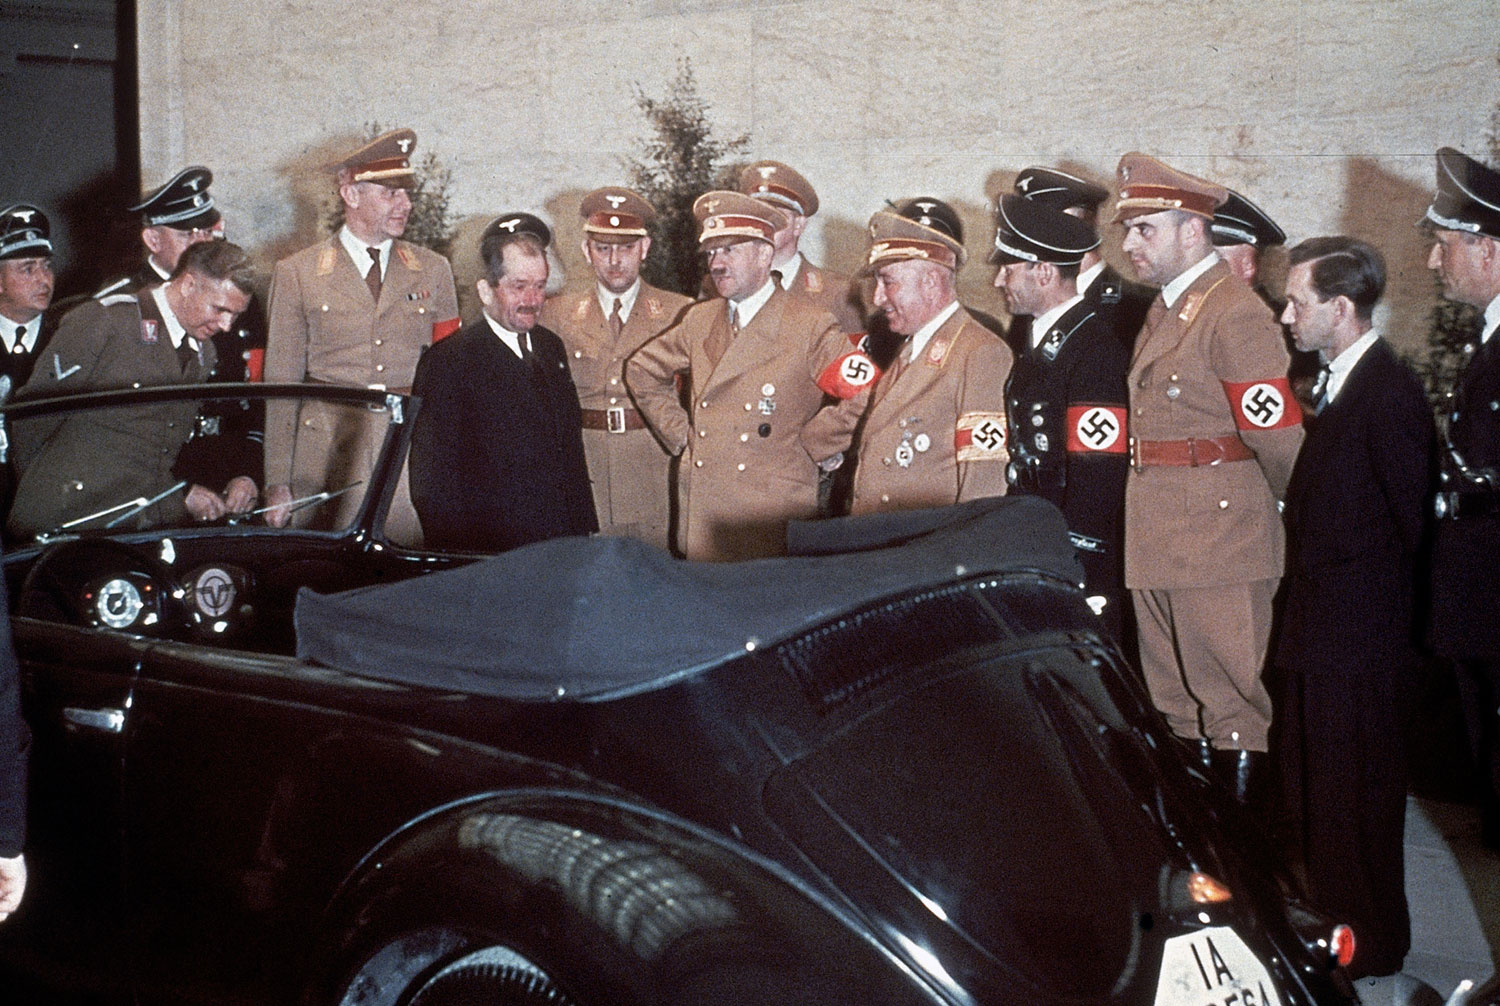 The automobile engineer Ferdinand Porsche (in suit), Adolf Hitler and, immediately to Hitler's left, the head of the German Labour Front, Robert Ley, admire Hitler's birthday gift on his 50th birthday: a convertible Volkswagen.